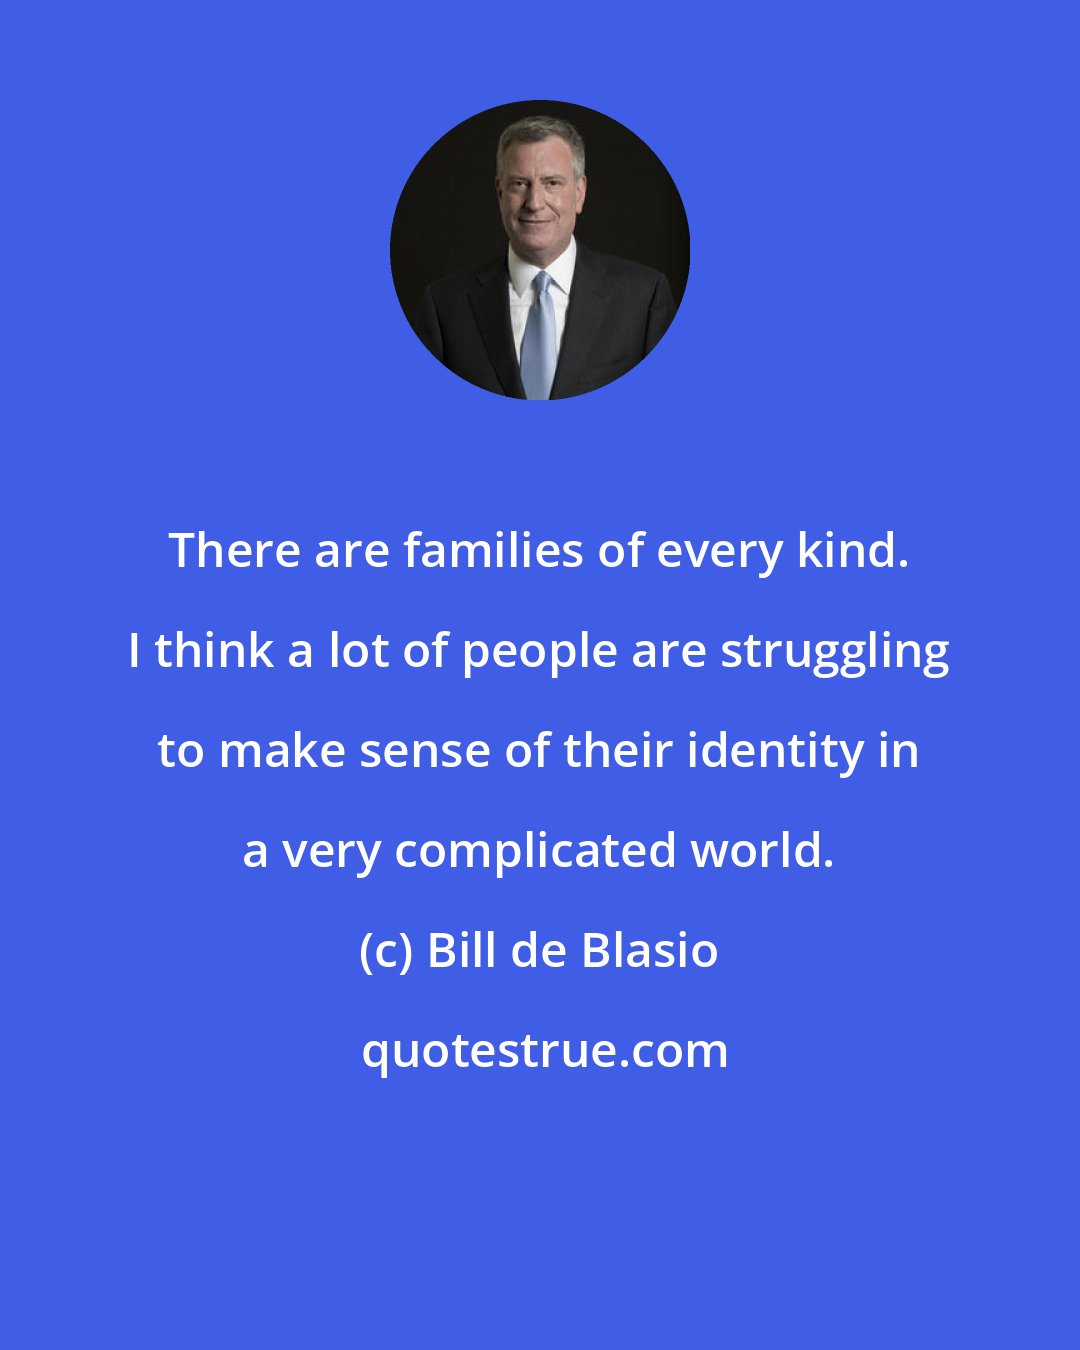 Bill de Blasio: There are families of every kind. I think a lot of people are struggling to make sense of their identity in a very complicated world.